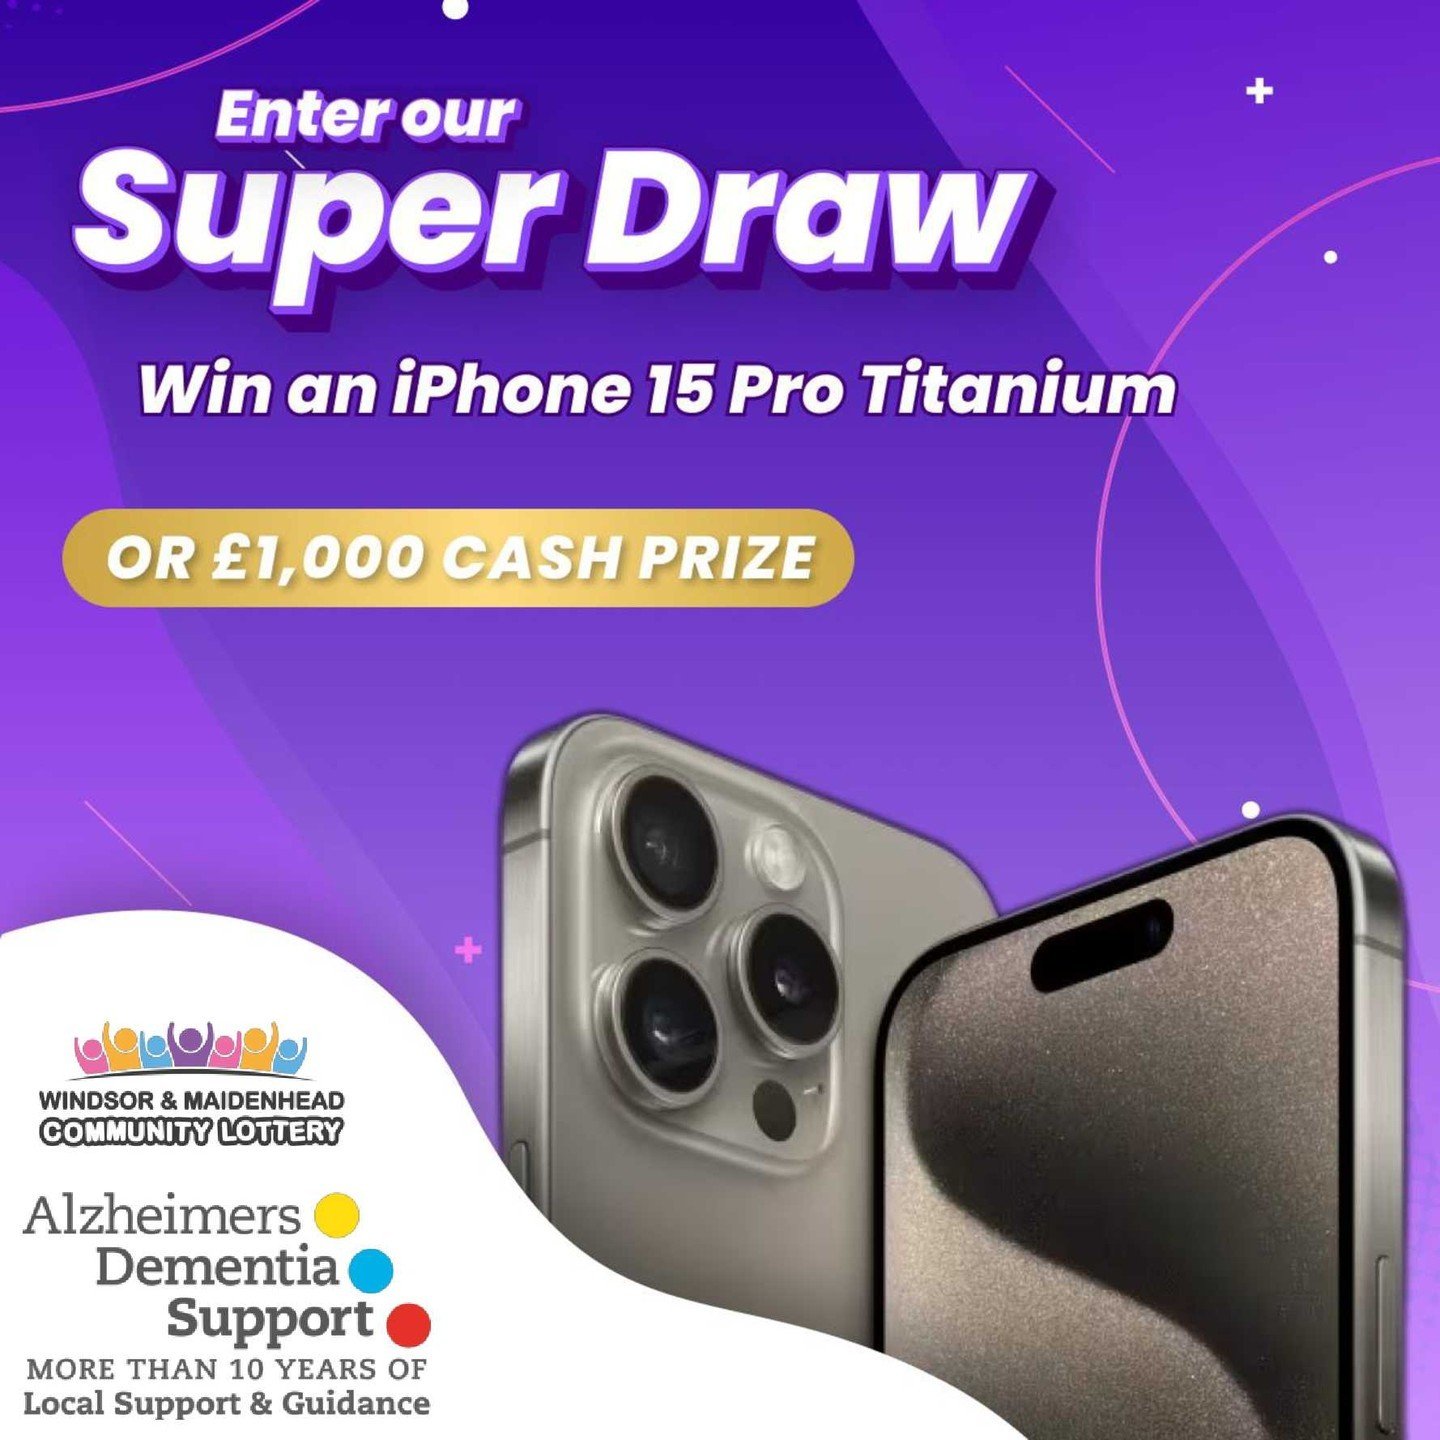 💷 Win &pound;1,000 or a brand-new iPhone 15 Pro Titanium, this weekend📱 with the #RBWMLottery!

Get your tickets for your chance to win 👉 [link in bio] and support 'ADS' Charity in a fun way!
 
#AlzheimersDementiaSupport #ADS #RBWMLottery #Charity